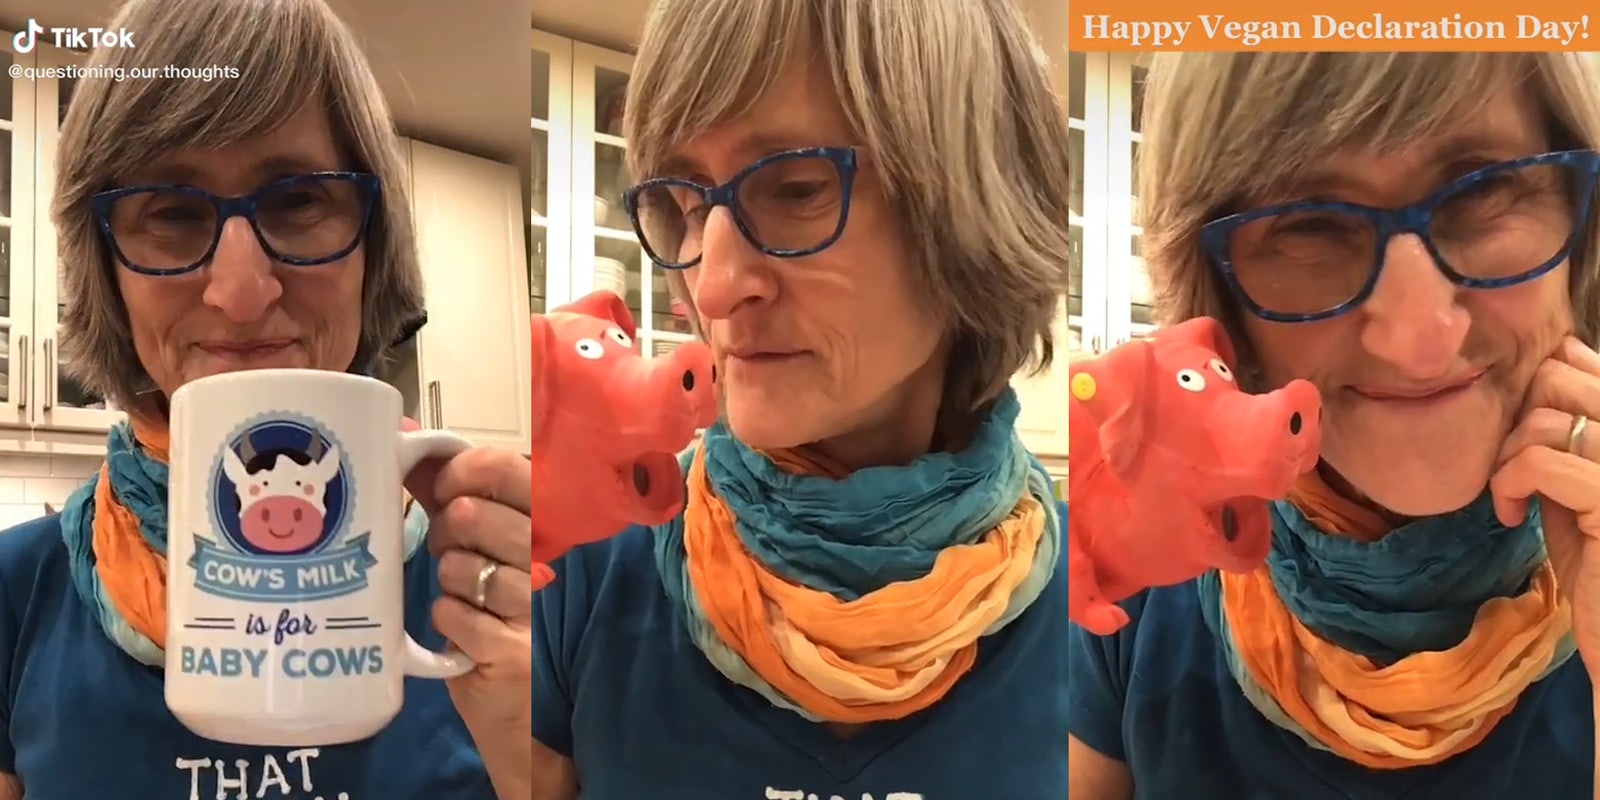 woman drinking from a mug that reads 'Cow's milk is for baby cows' (l) playing with a plastic pig (c) 'Happy Vegan Declaration Day!' cpation with woman smiling holding toy pig